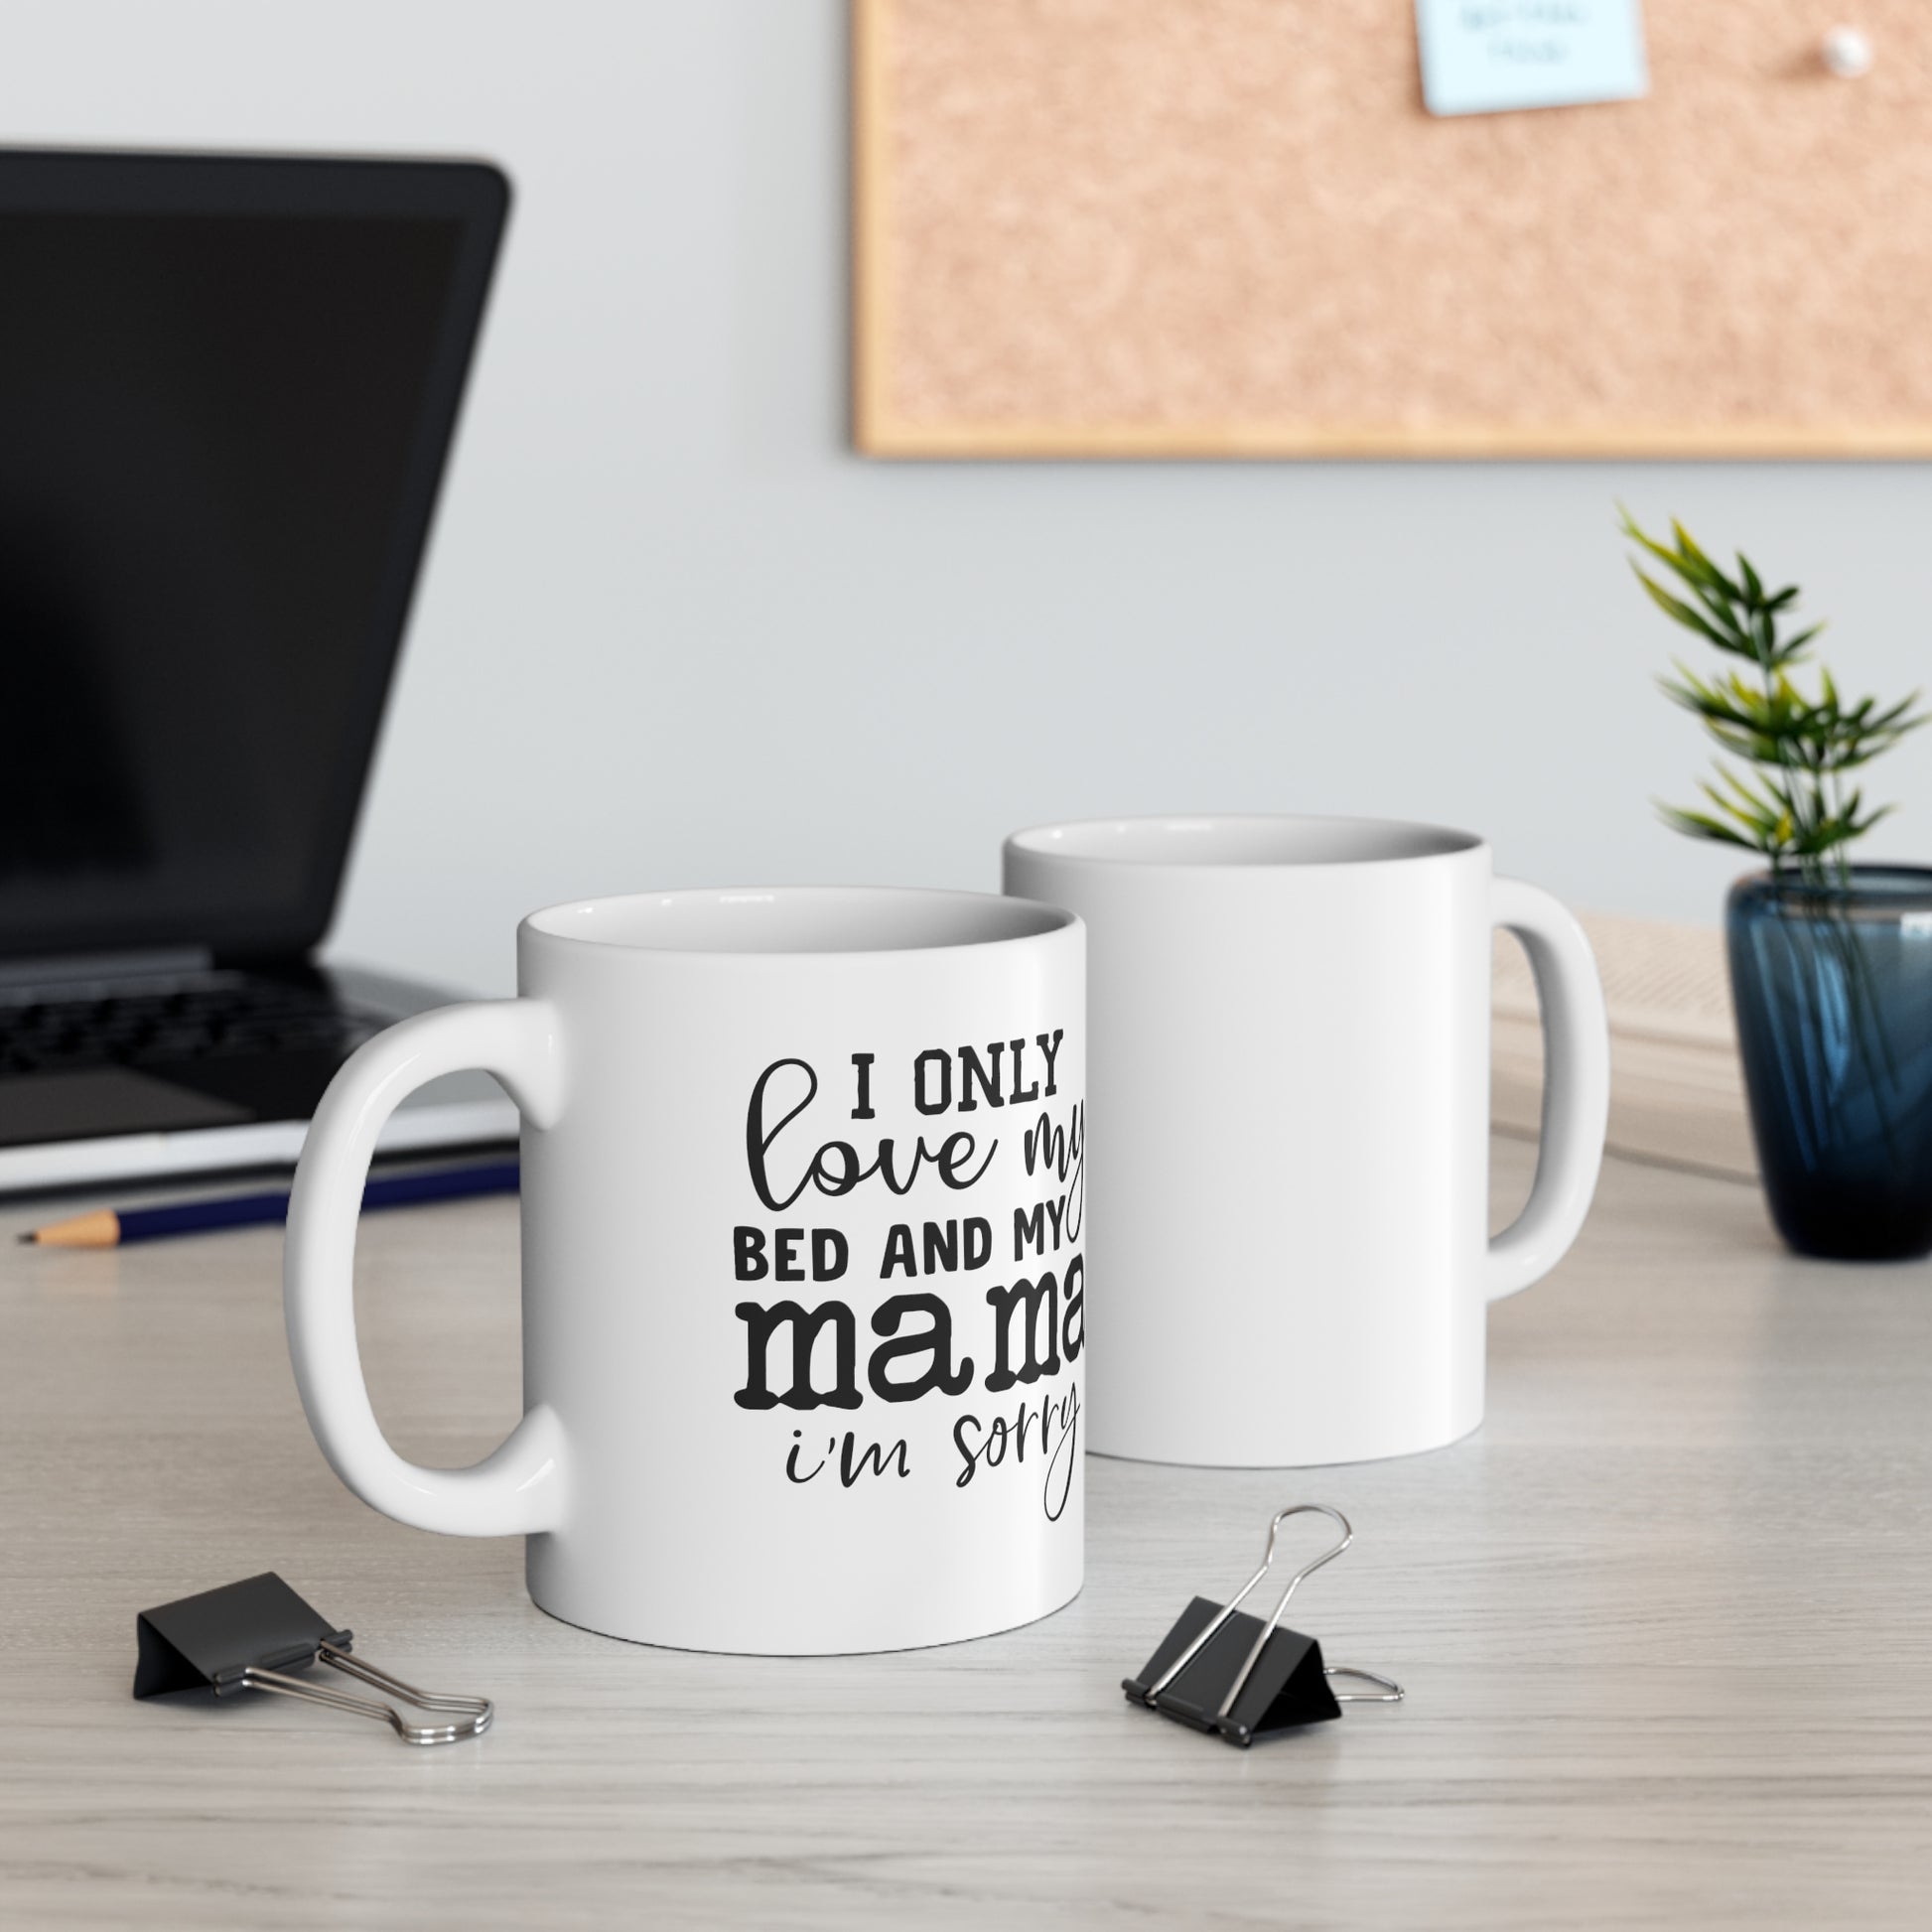 "I Only Love My Bed & My Mama" Mug 11oz - Weave Got Gifts - Unique Gifts You Won’t Find Anywhere Else!